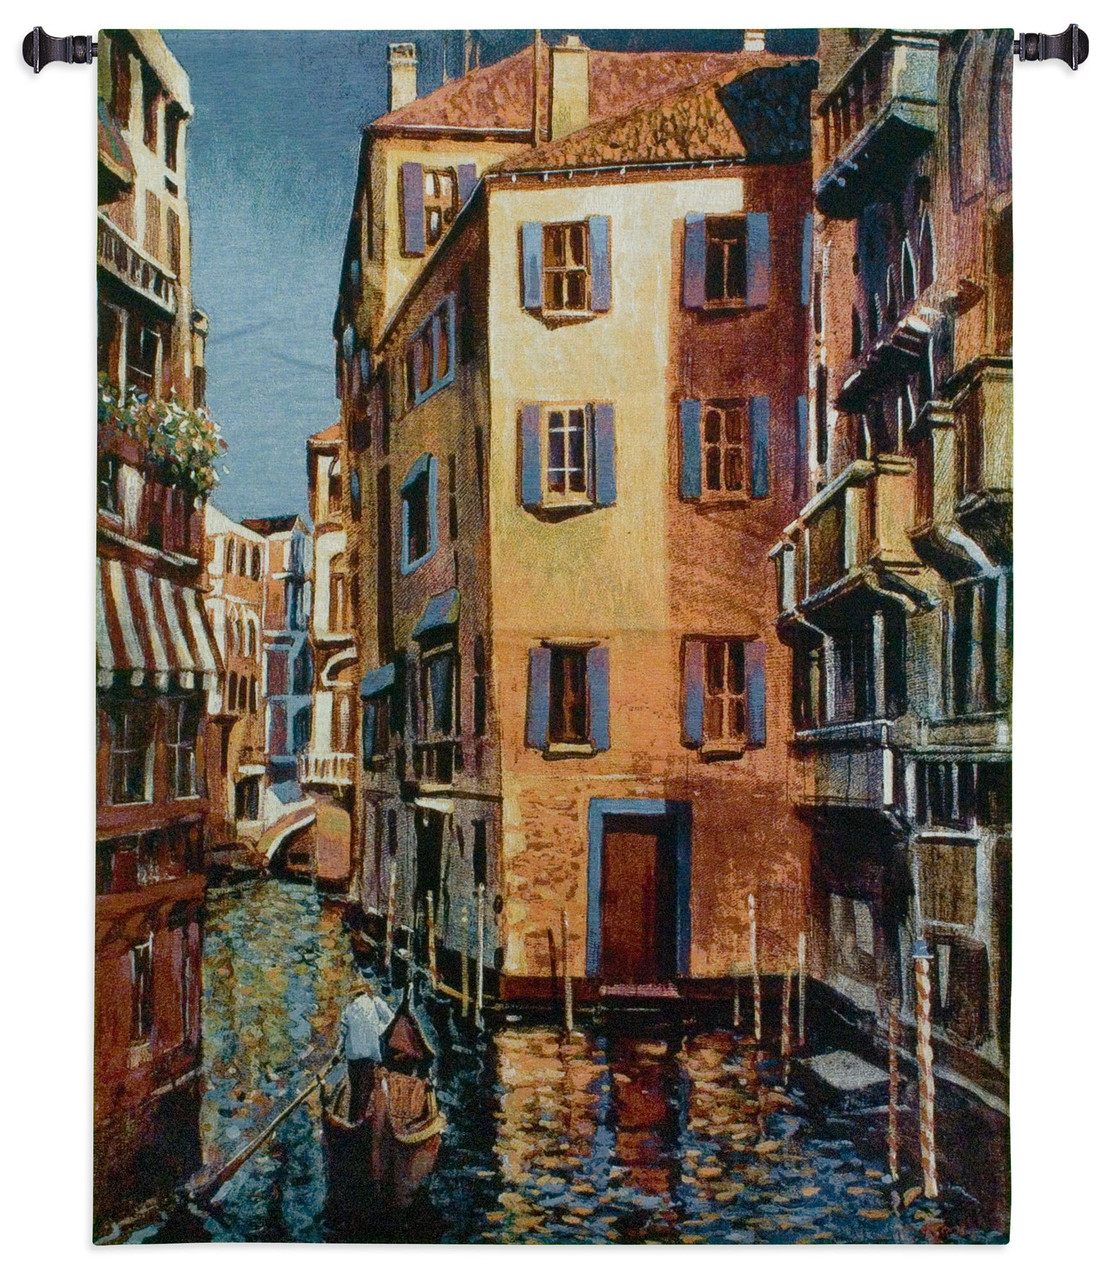 Venetian Light by Michael O'Toole Woven Tapestry Wall Art Hanging  Romantic Gondolas in Venitian Water Canals |100% Cotton USA Size 53x40